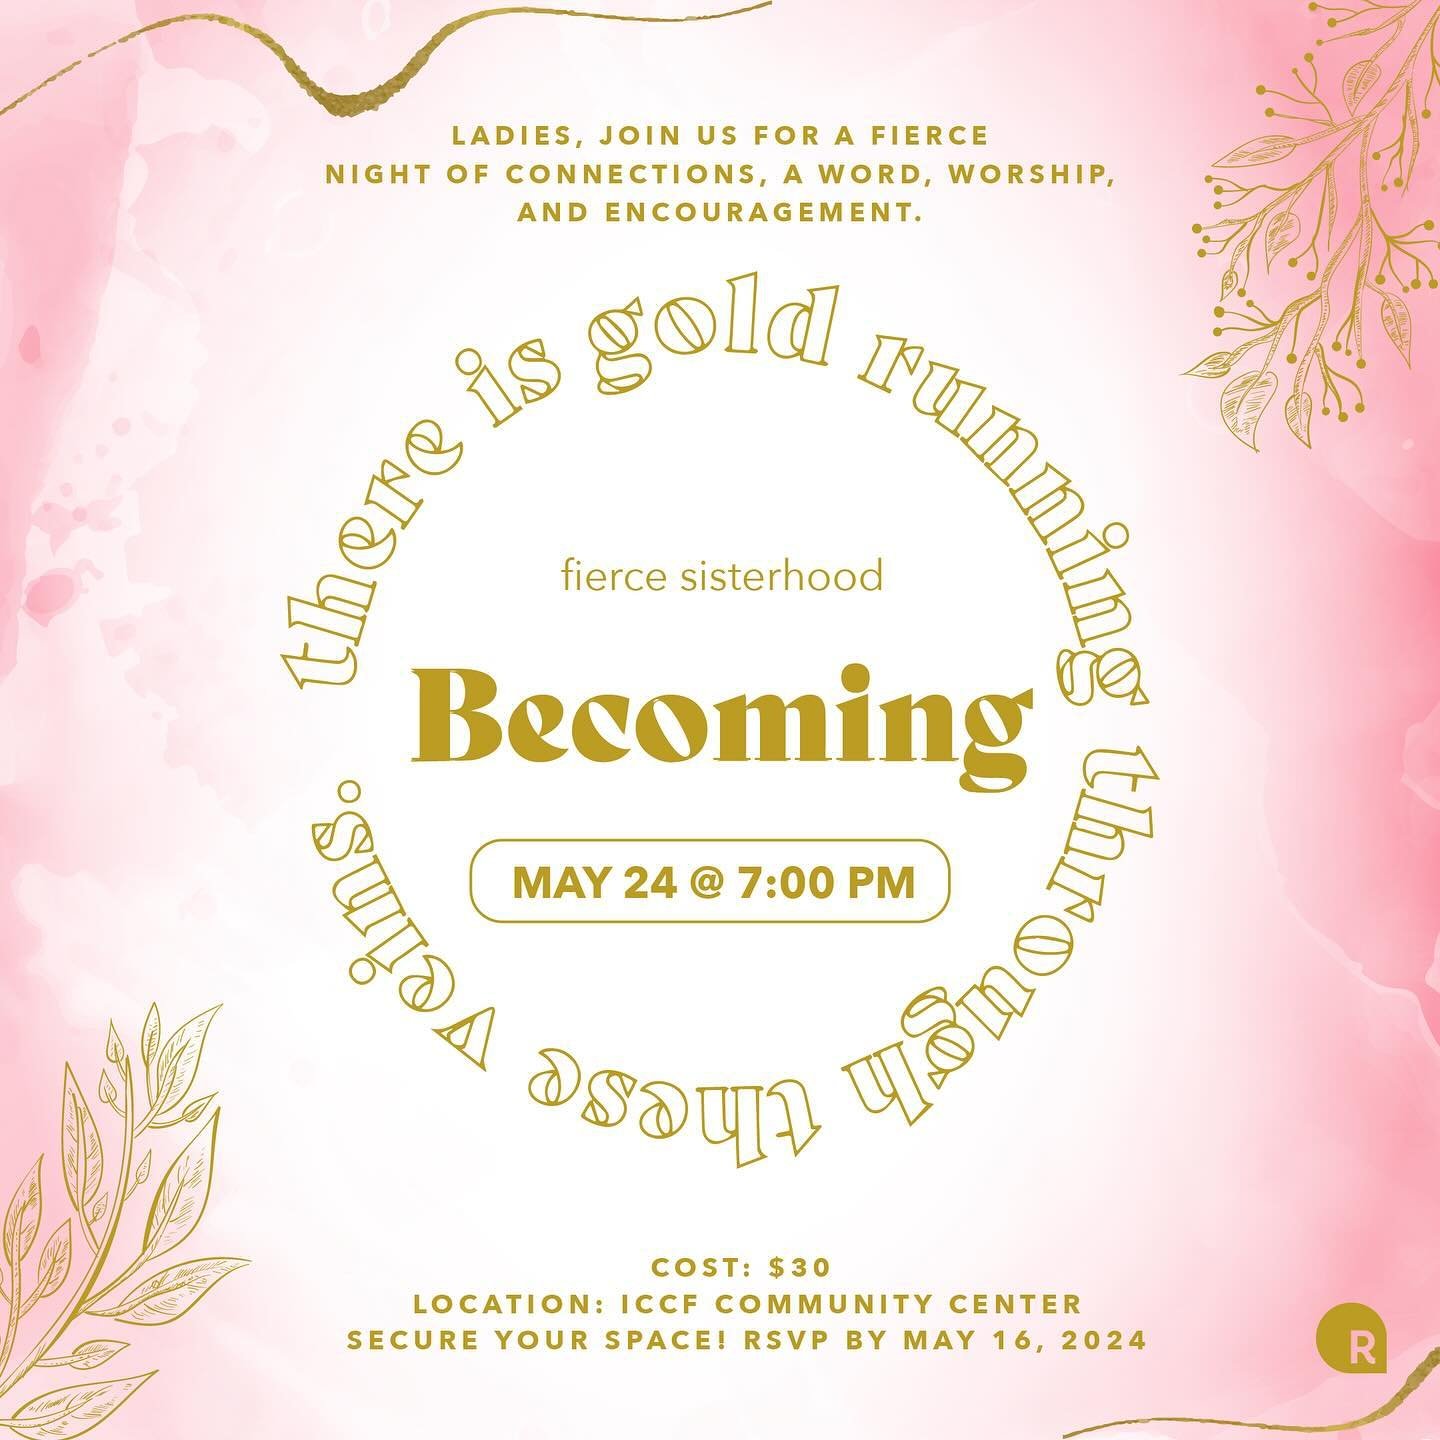 Calling all Relevant women for a fierce sisterhood ladies night! ✨ 

Join us for an evening of worship and building meaningful connections, plus a special message from Ps. Latricia!

7:00PM |  ICCF Community Center |  Cost: $25 
RSVP by May 16 ➡️ Bit